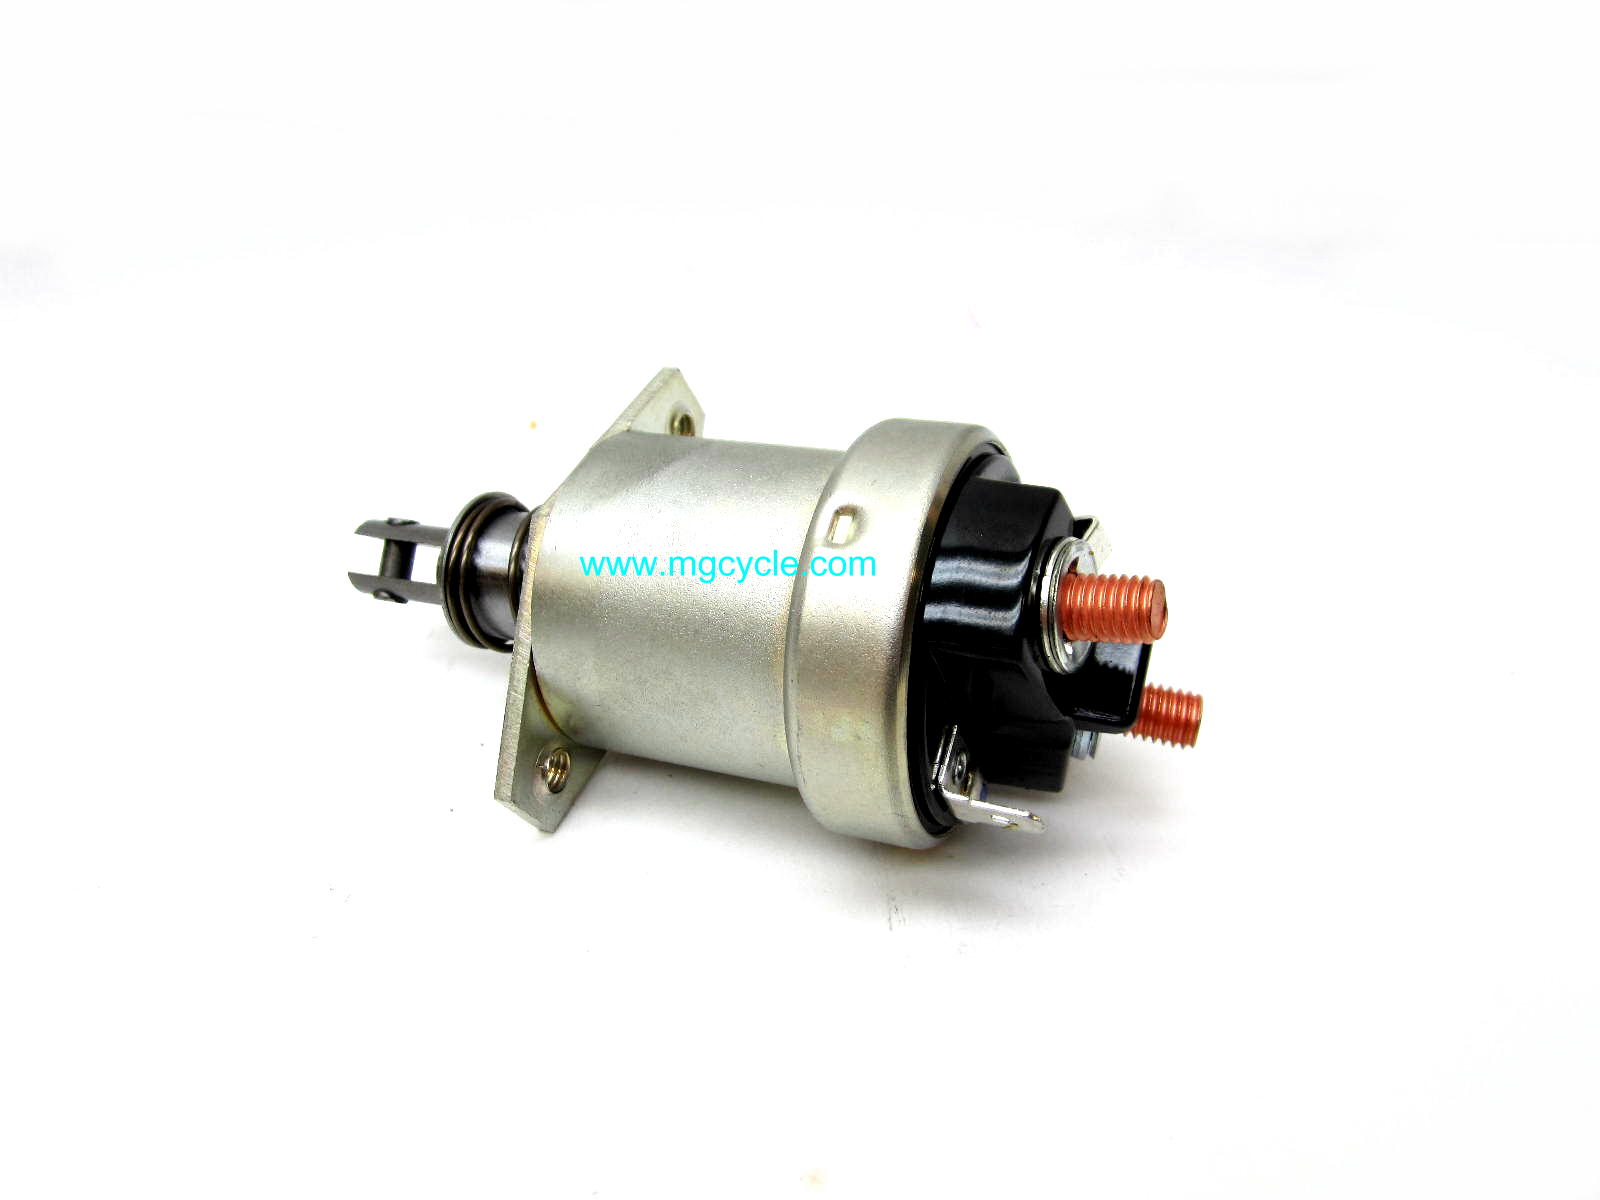 Starter solenoid modified to fit Marelli starters